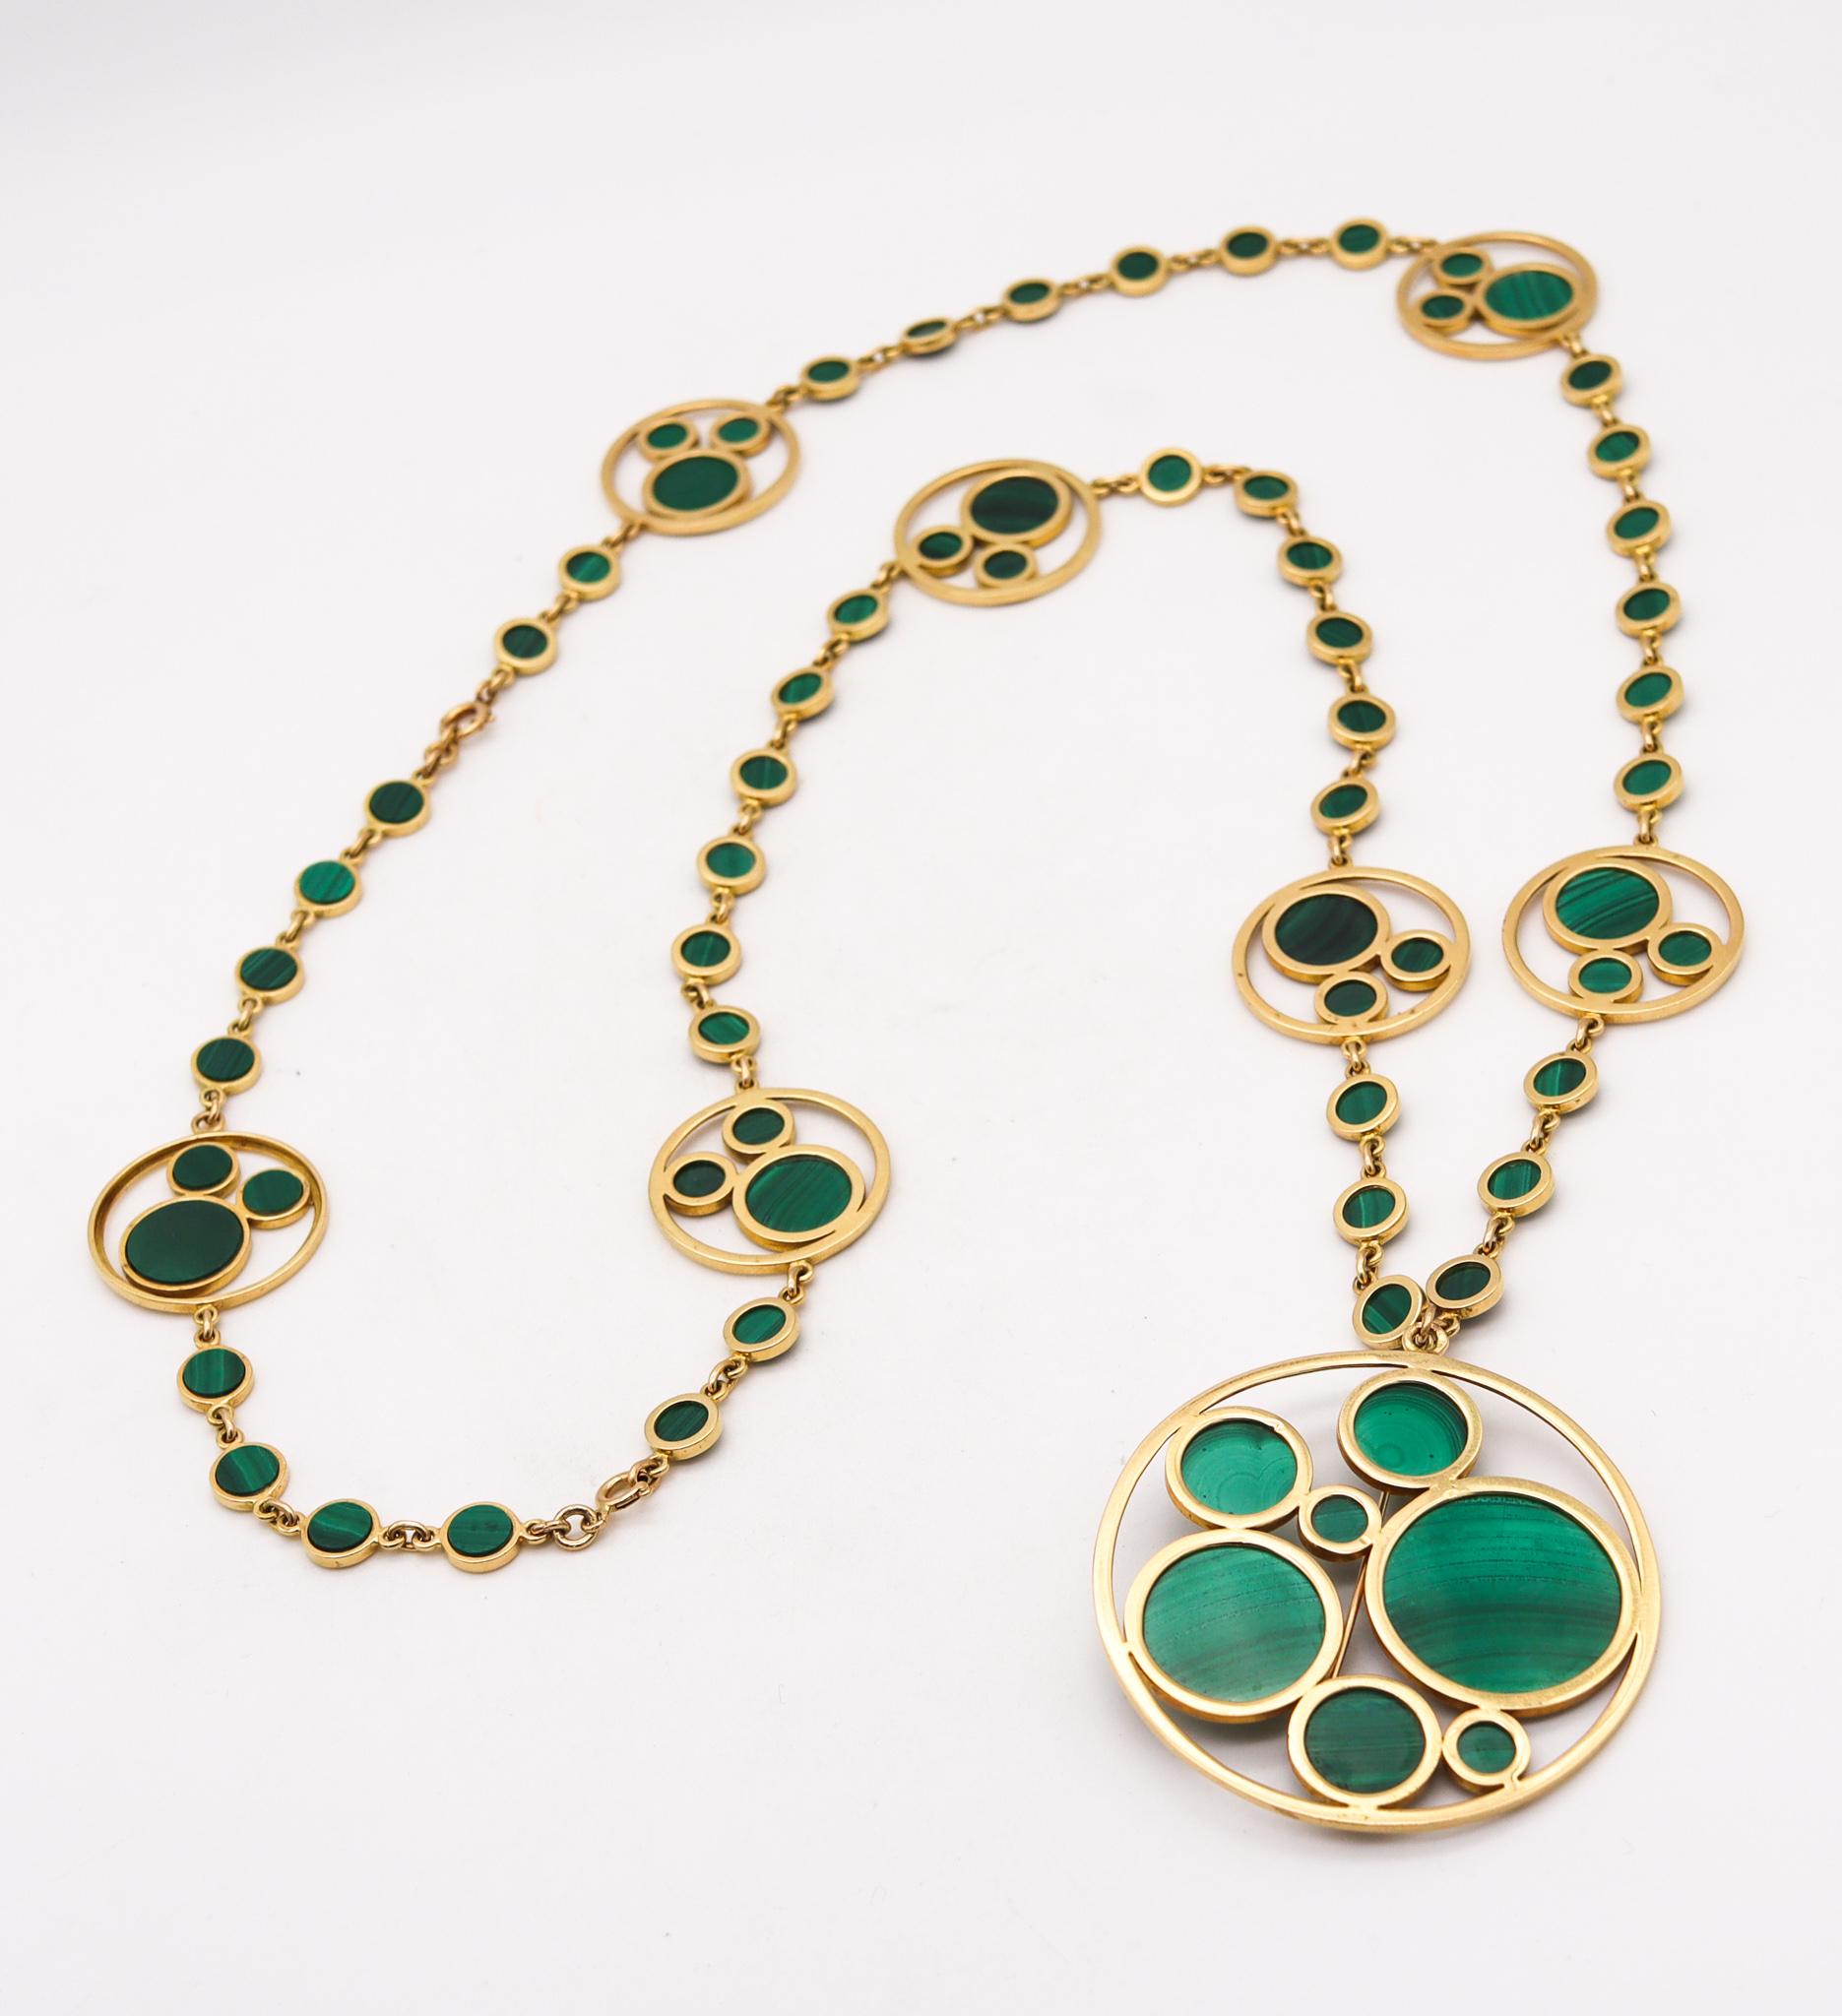 Convertible sautoir necklace designed by Edouard Richard for Chaumet.

Beautiful convertible geometric suite composed by three pieces. This versatile gorgeous necklace sautoir has been created back in the early 1970 in Paris France at the atelier of